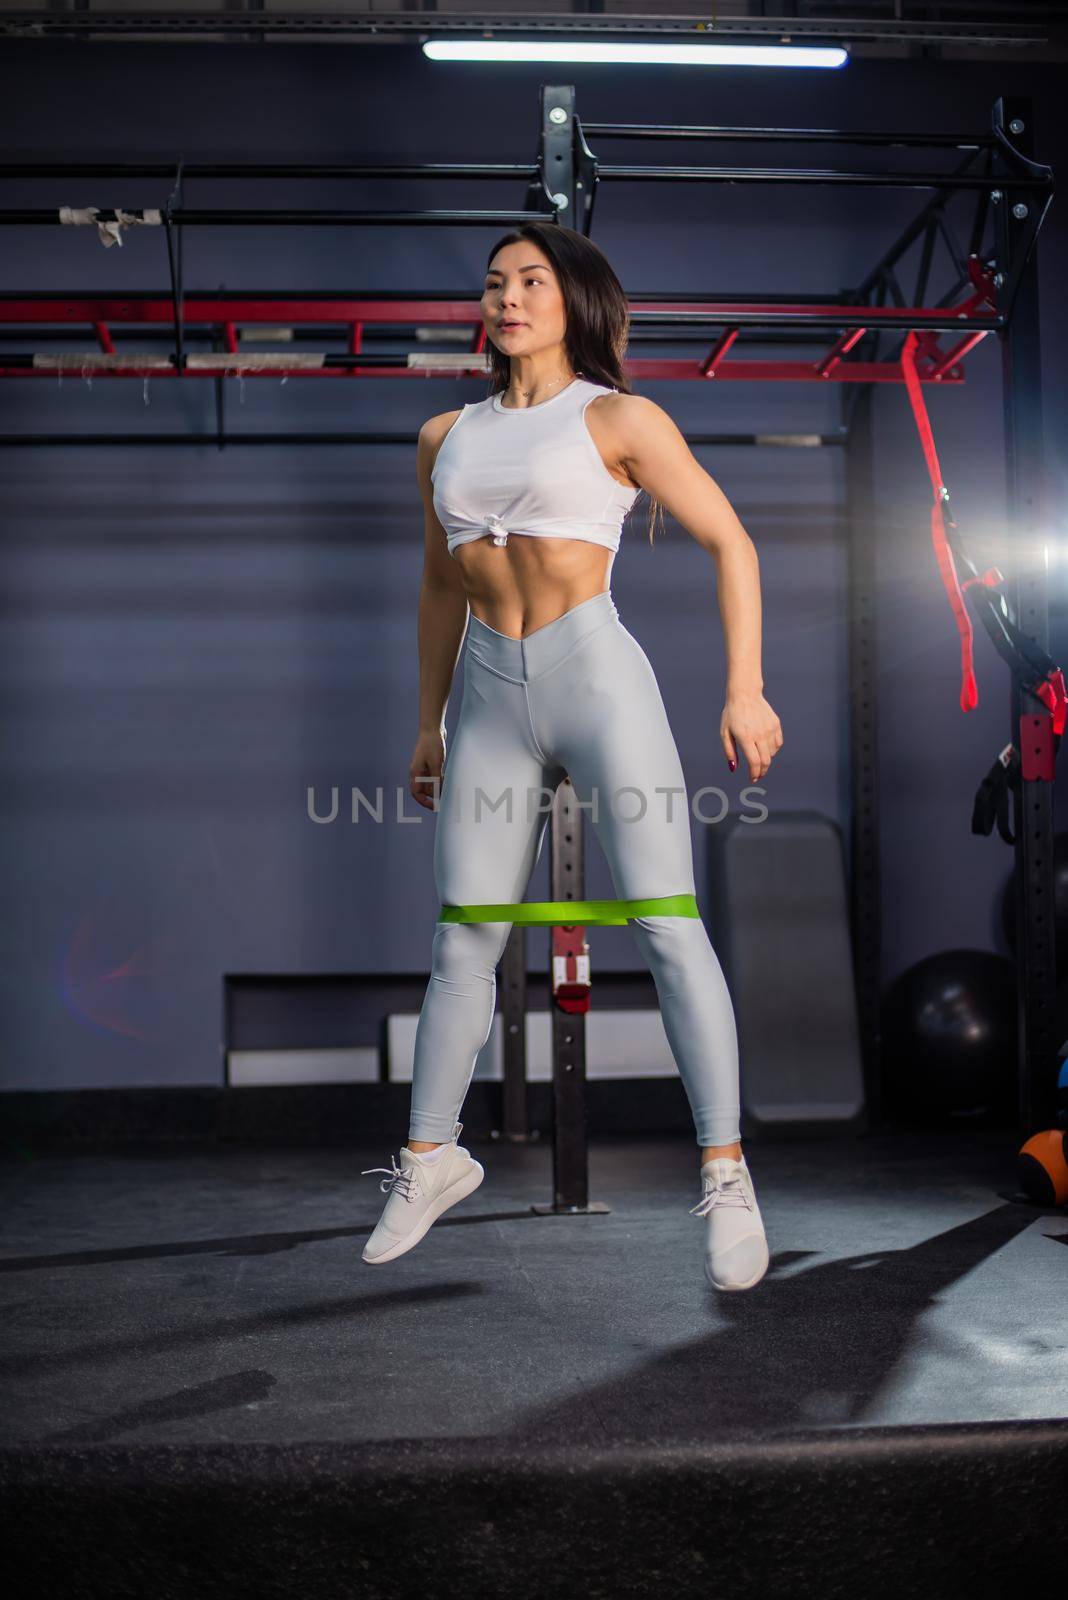 Asian woman doing exercise with fitness rubber band in the gym.